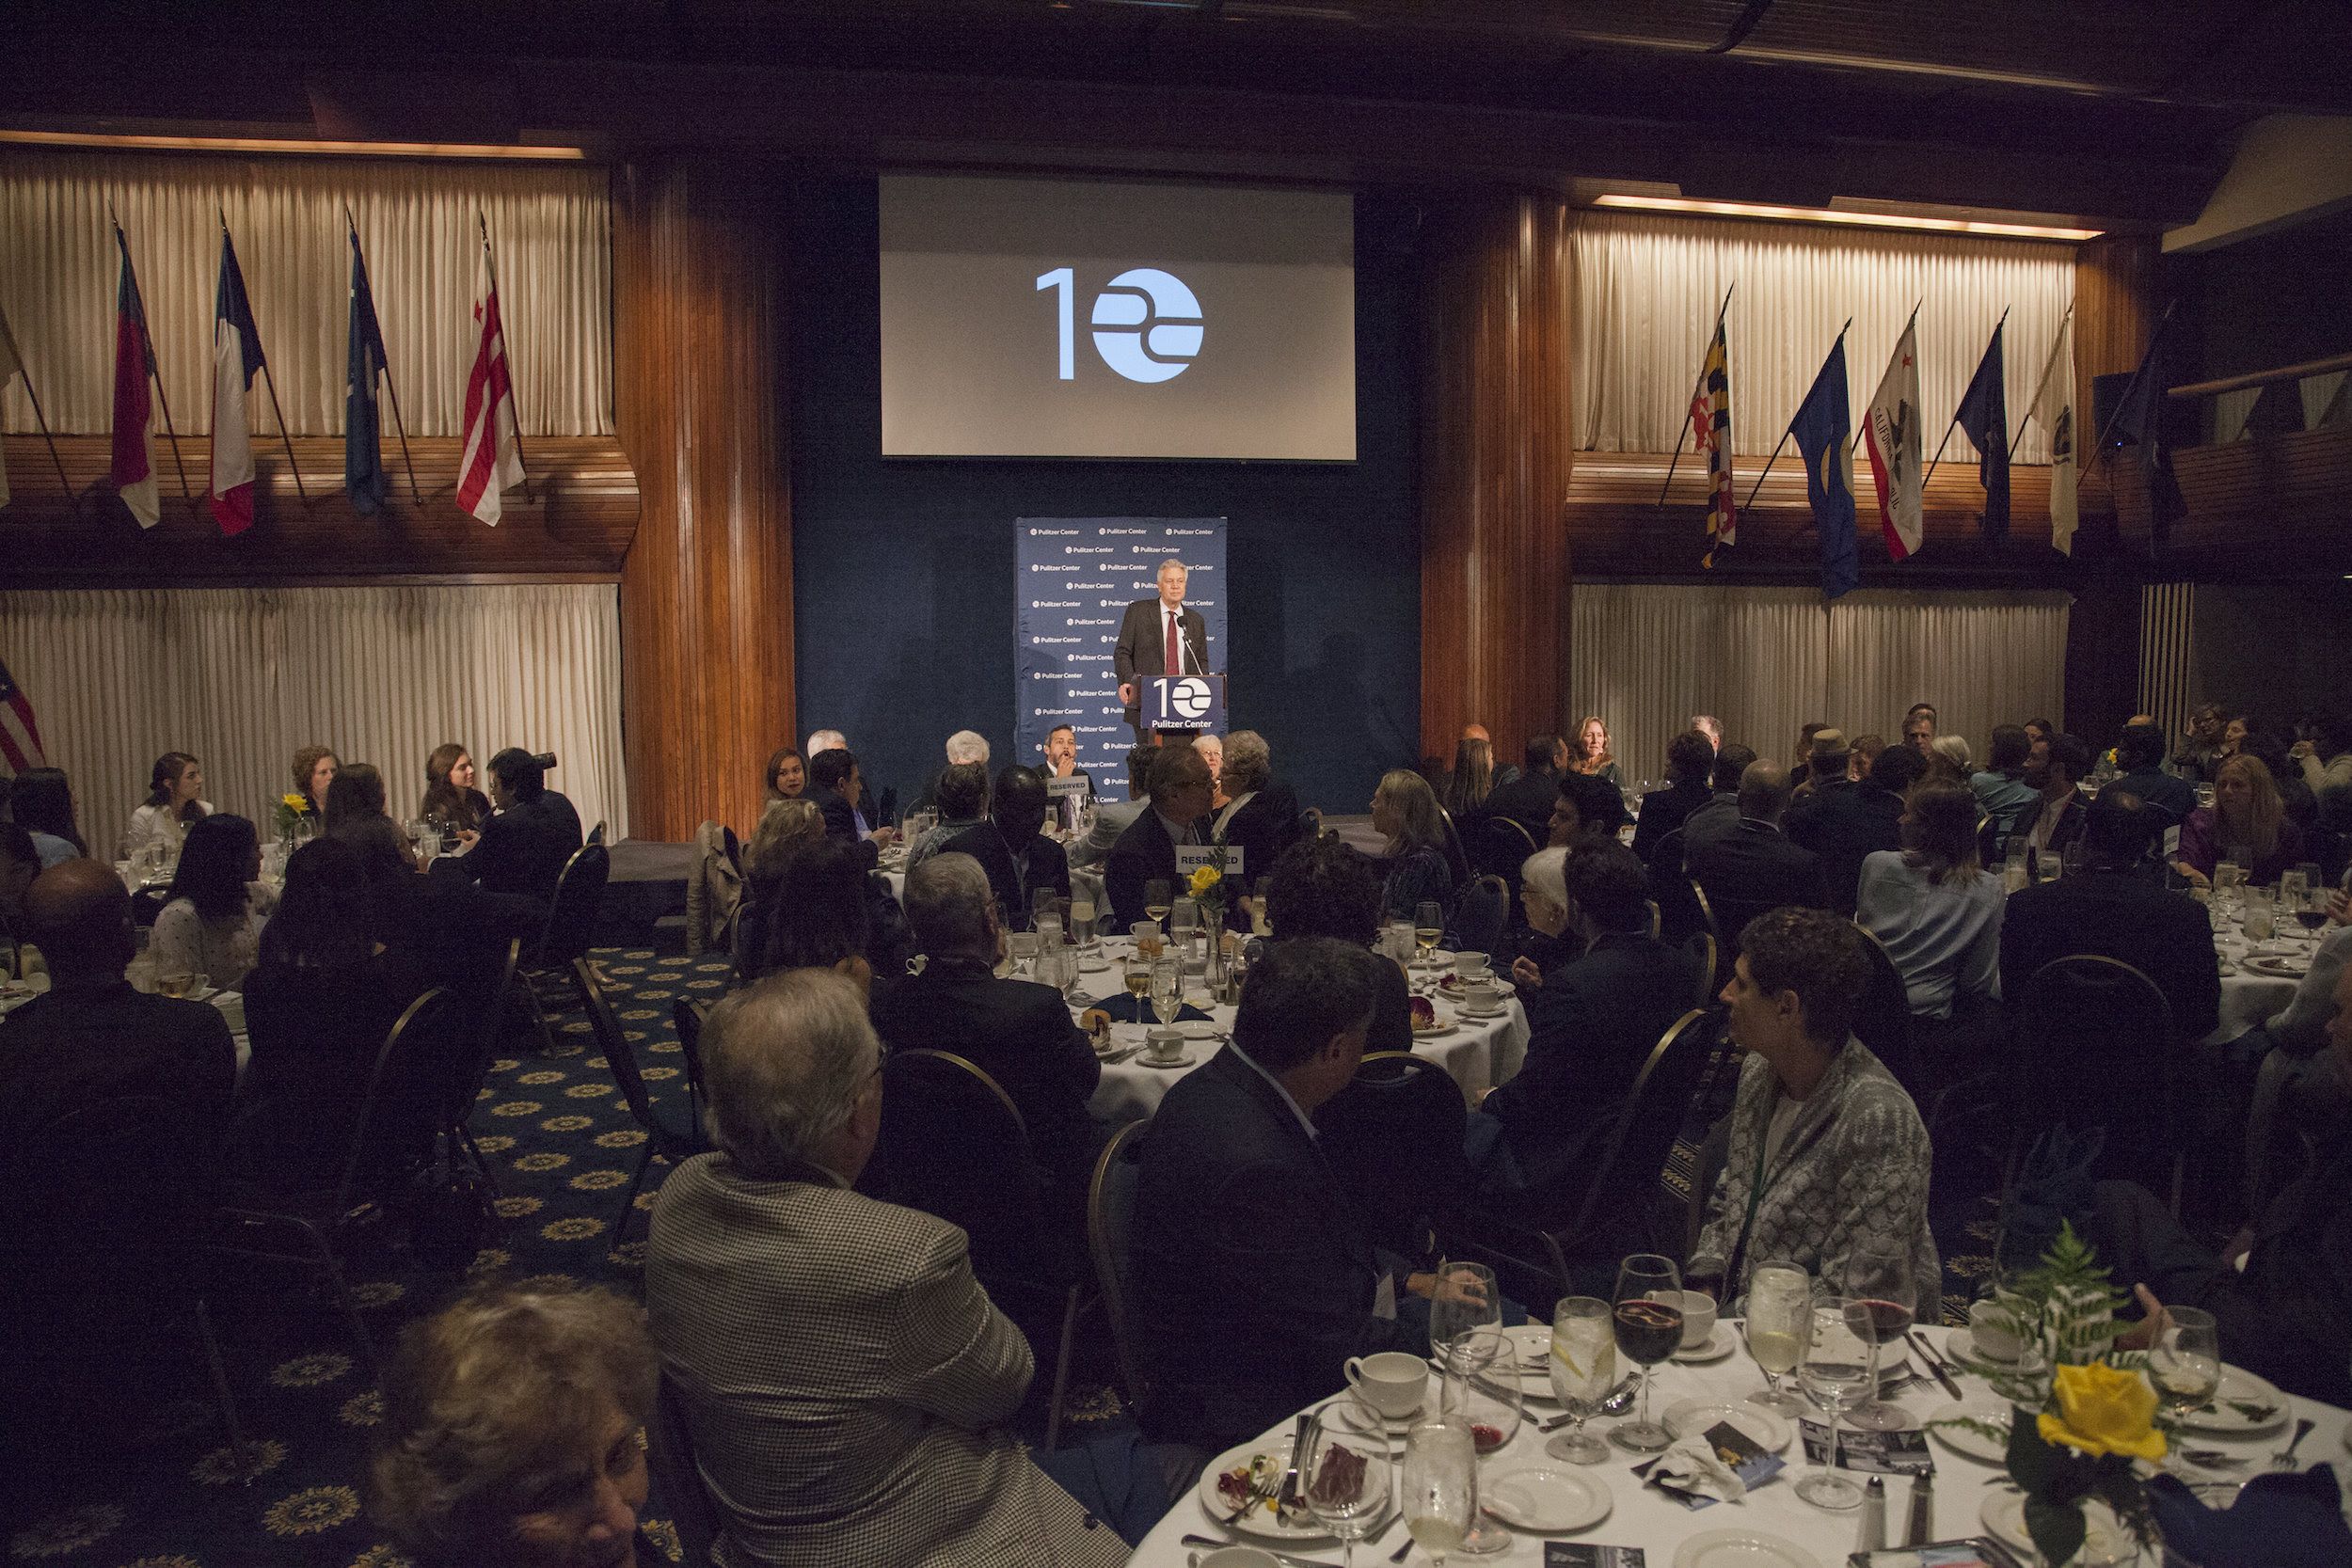 Grantees and fellows gather at The National Press Club to celebrate the Pulitzer Center's tenth anniversary. Image by Jin Ding. Washington, D.C., 2016.